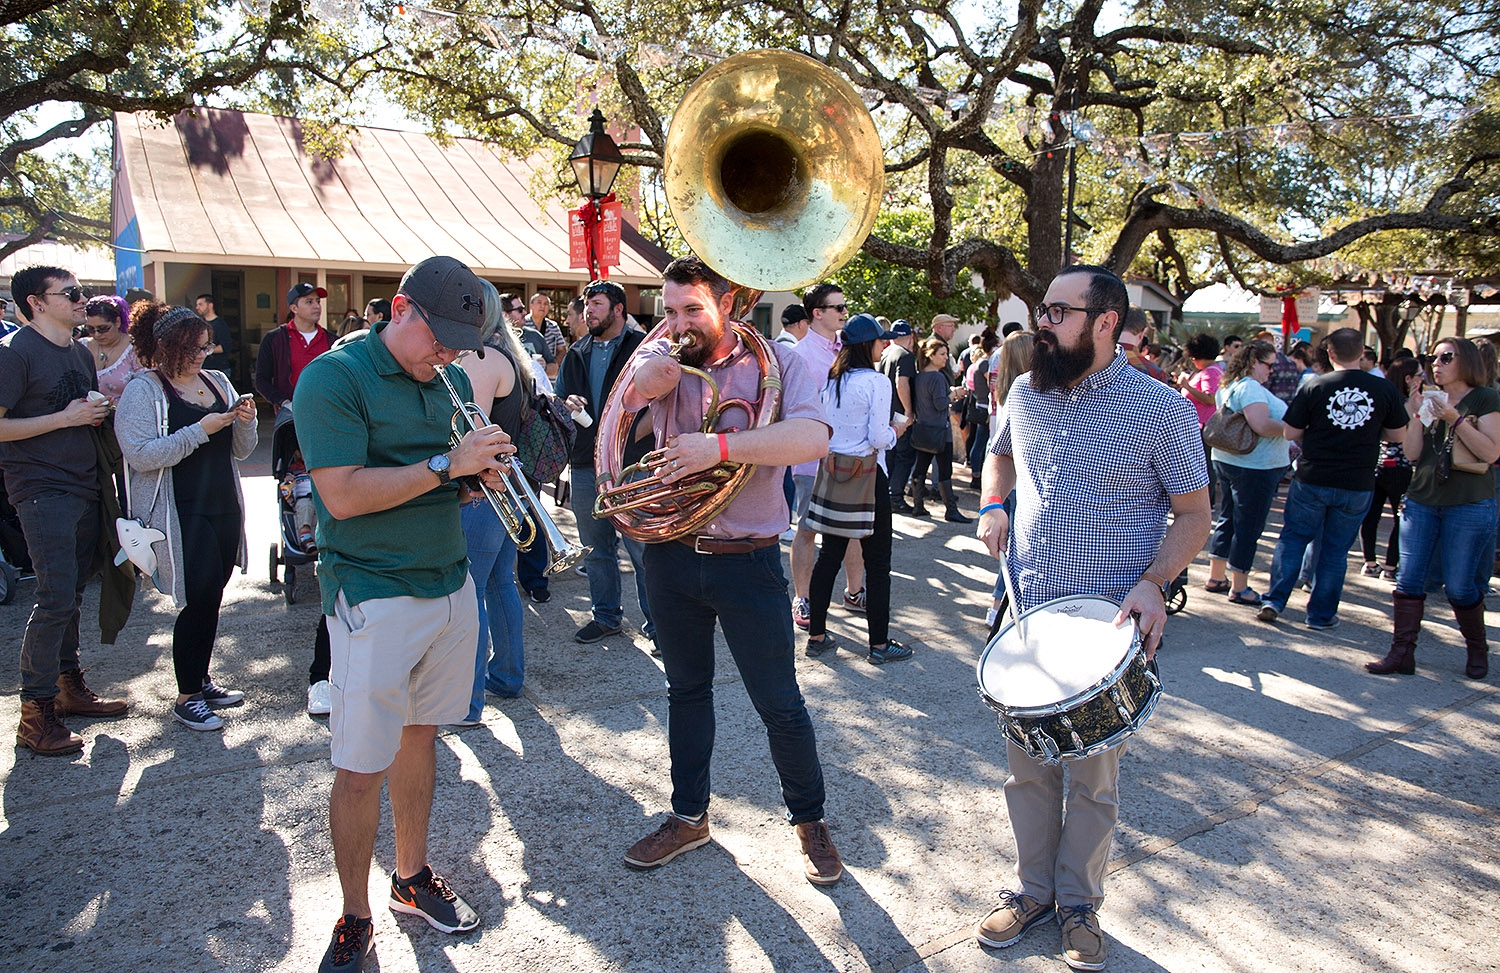 Java lovers descended on La Villita on Saturday for the sold out San Antonio Coffee Festival. <em><b>Photo by B. Kay Richter | Heron contributor</b></em>